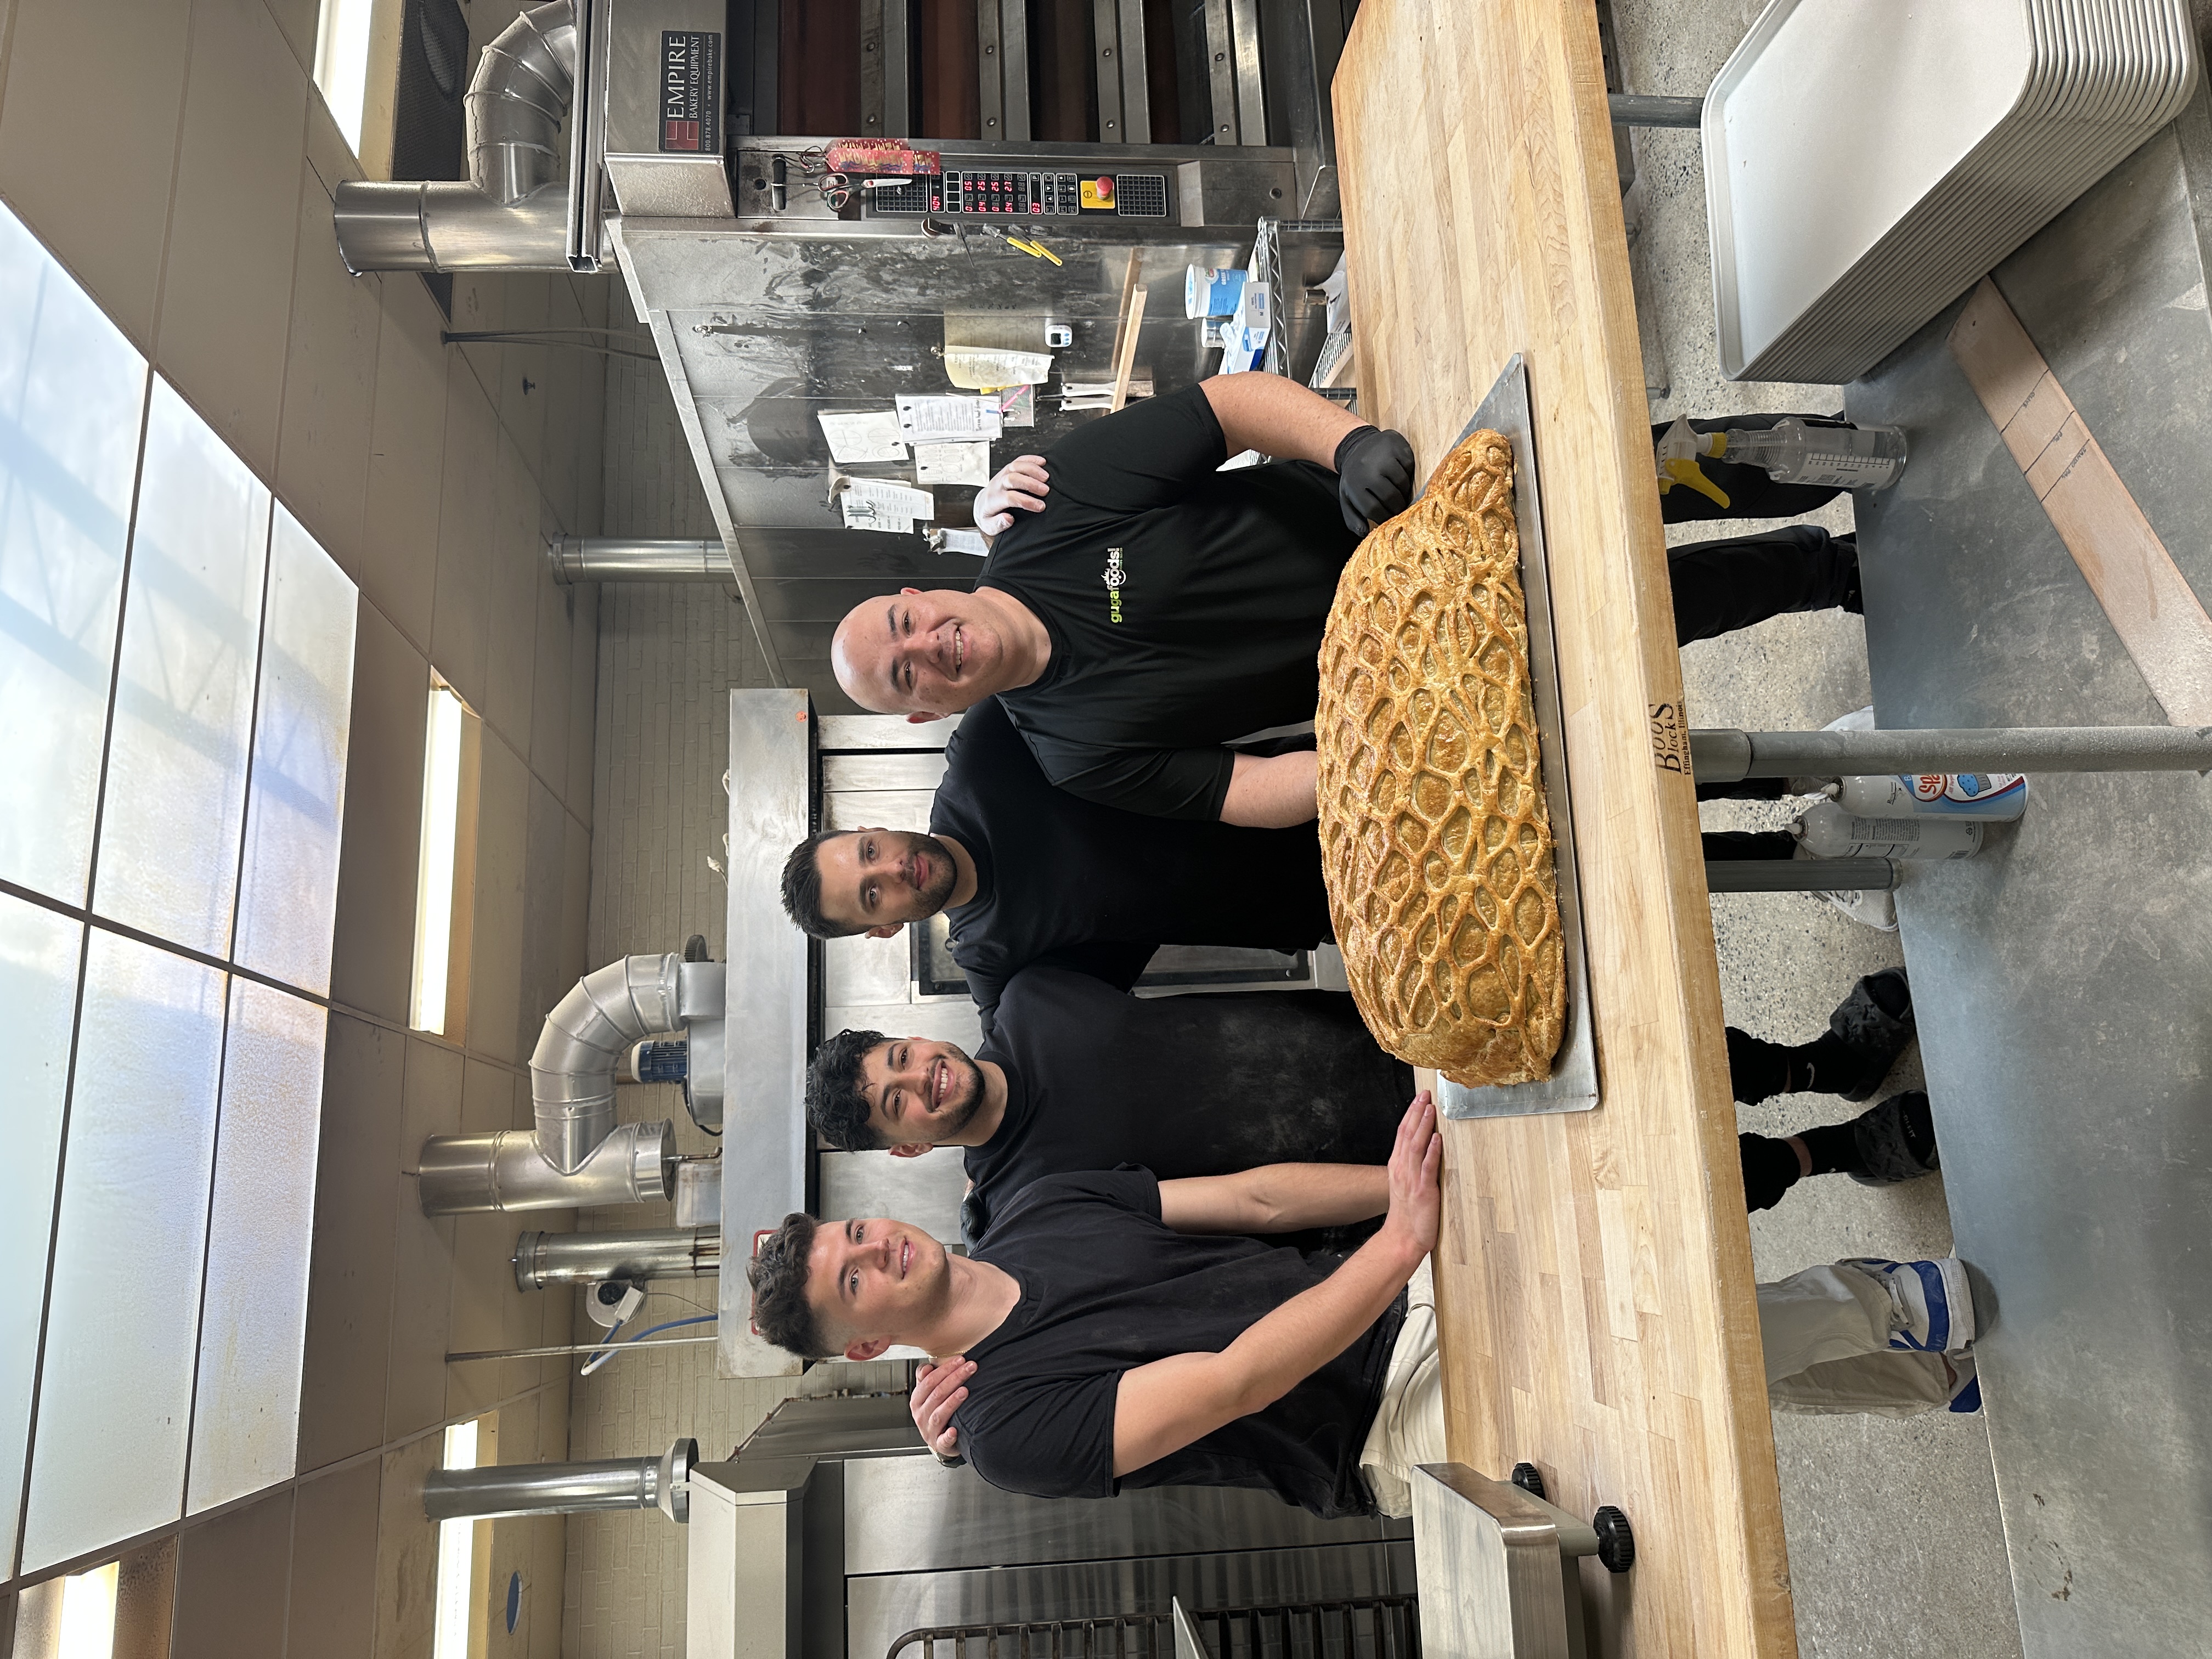 (Left to right) TikTok stars Nick DiGiovanni, The Golden Balance, Max the Meat Guy and Guga Foods stood in a kitchen in front of the world's largest beef wellington laid on a table